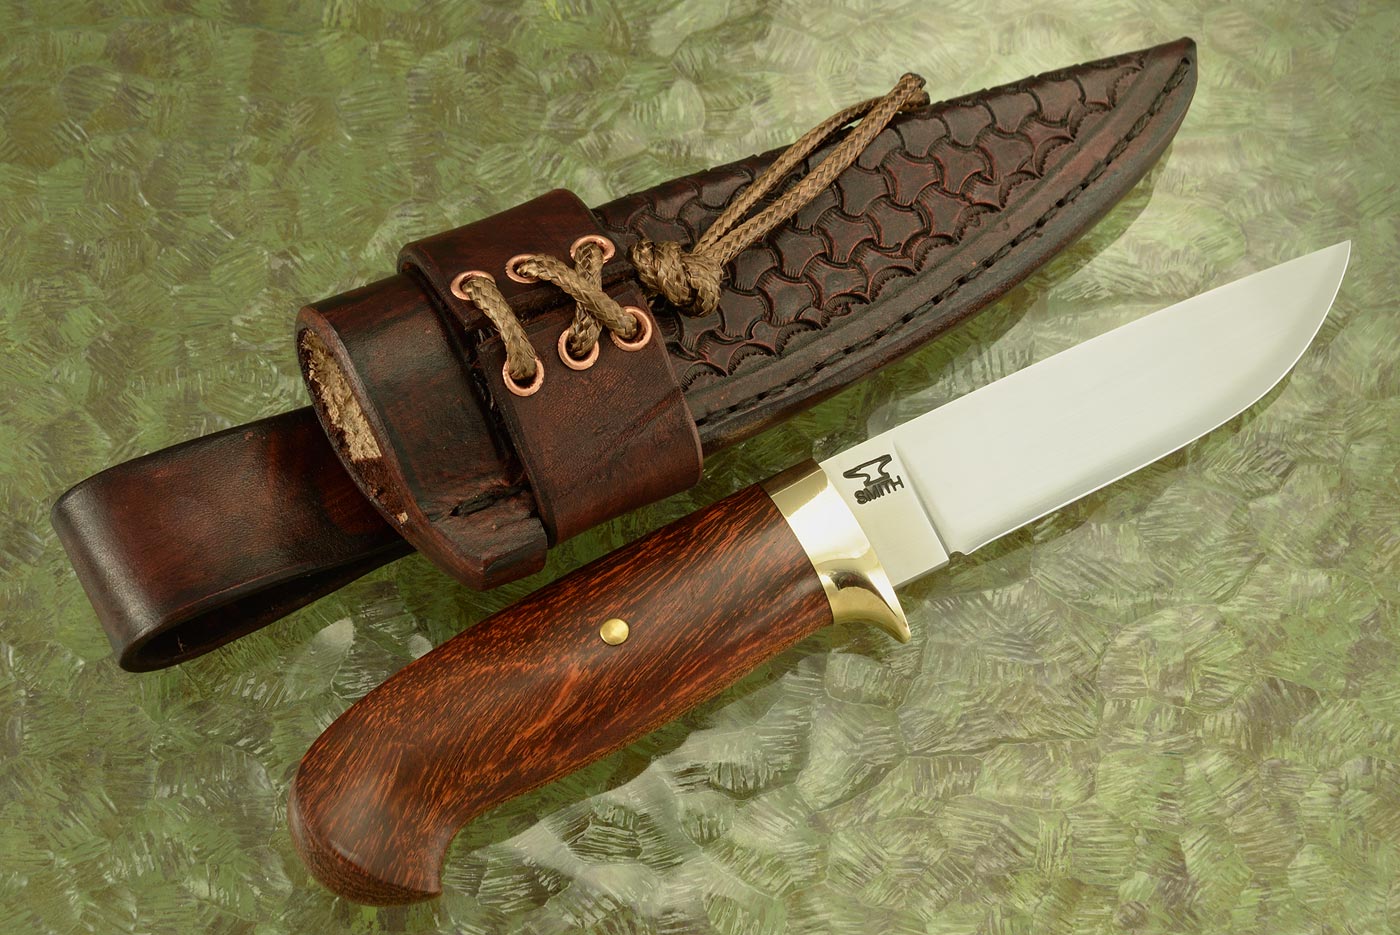 Drop Point Hunter (Model LR) with Camel Thorn